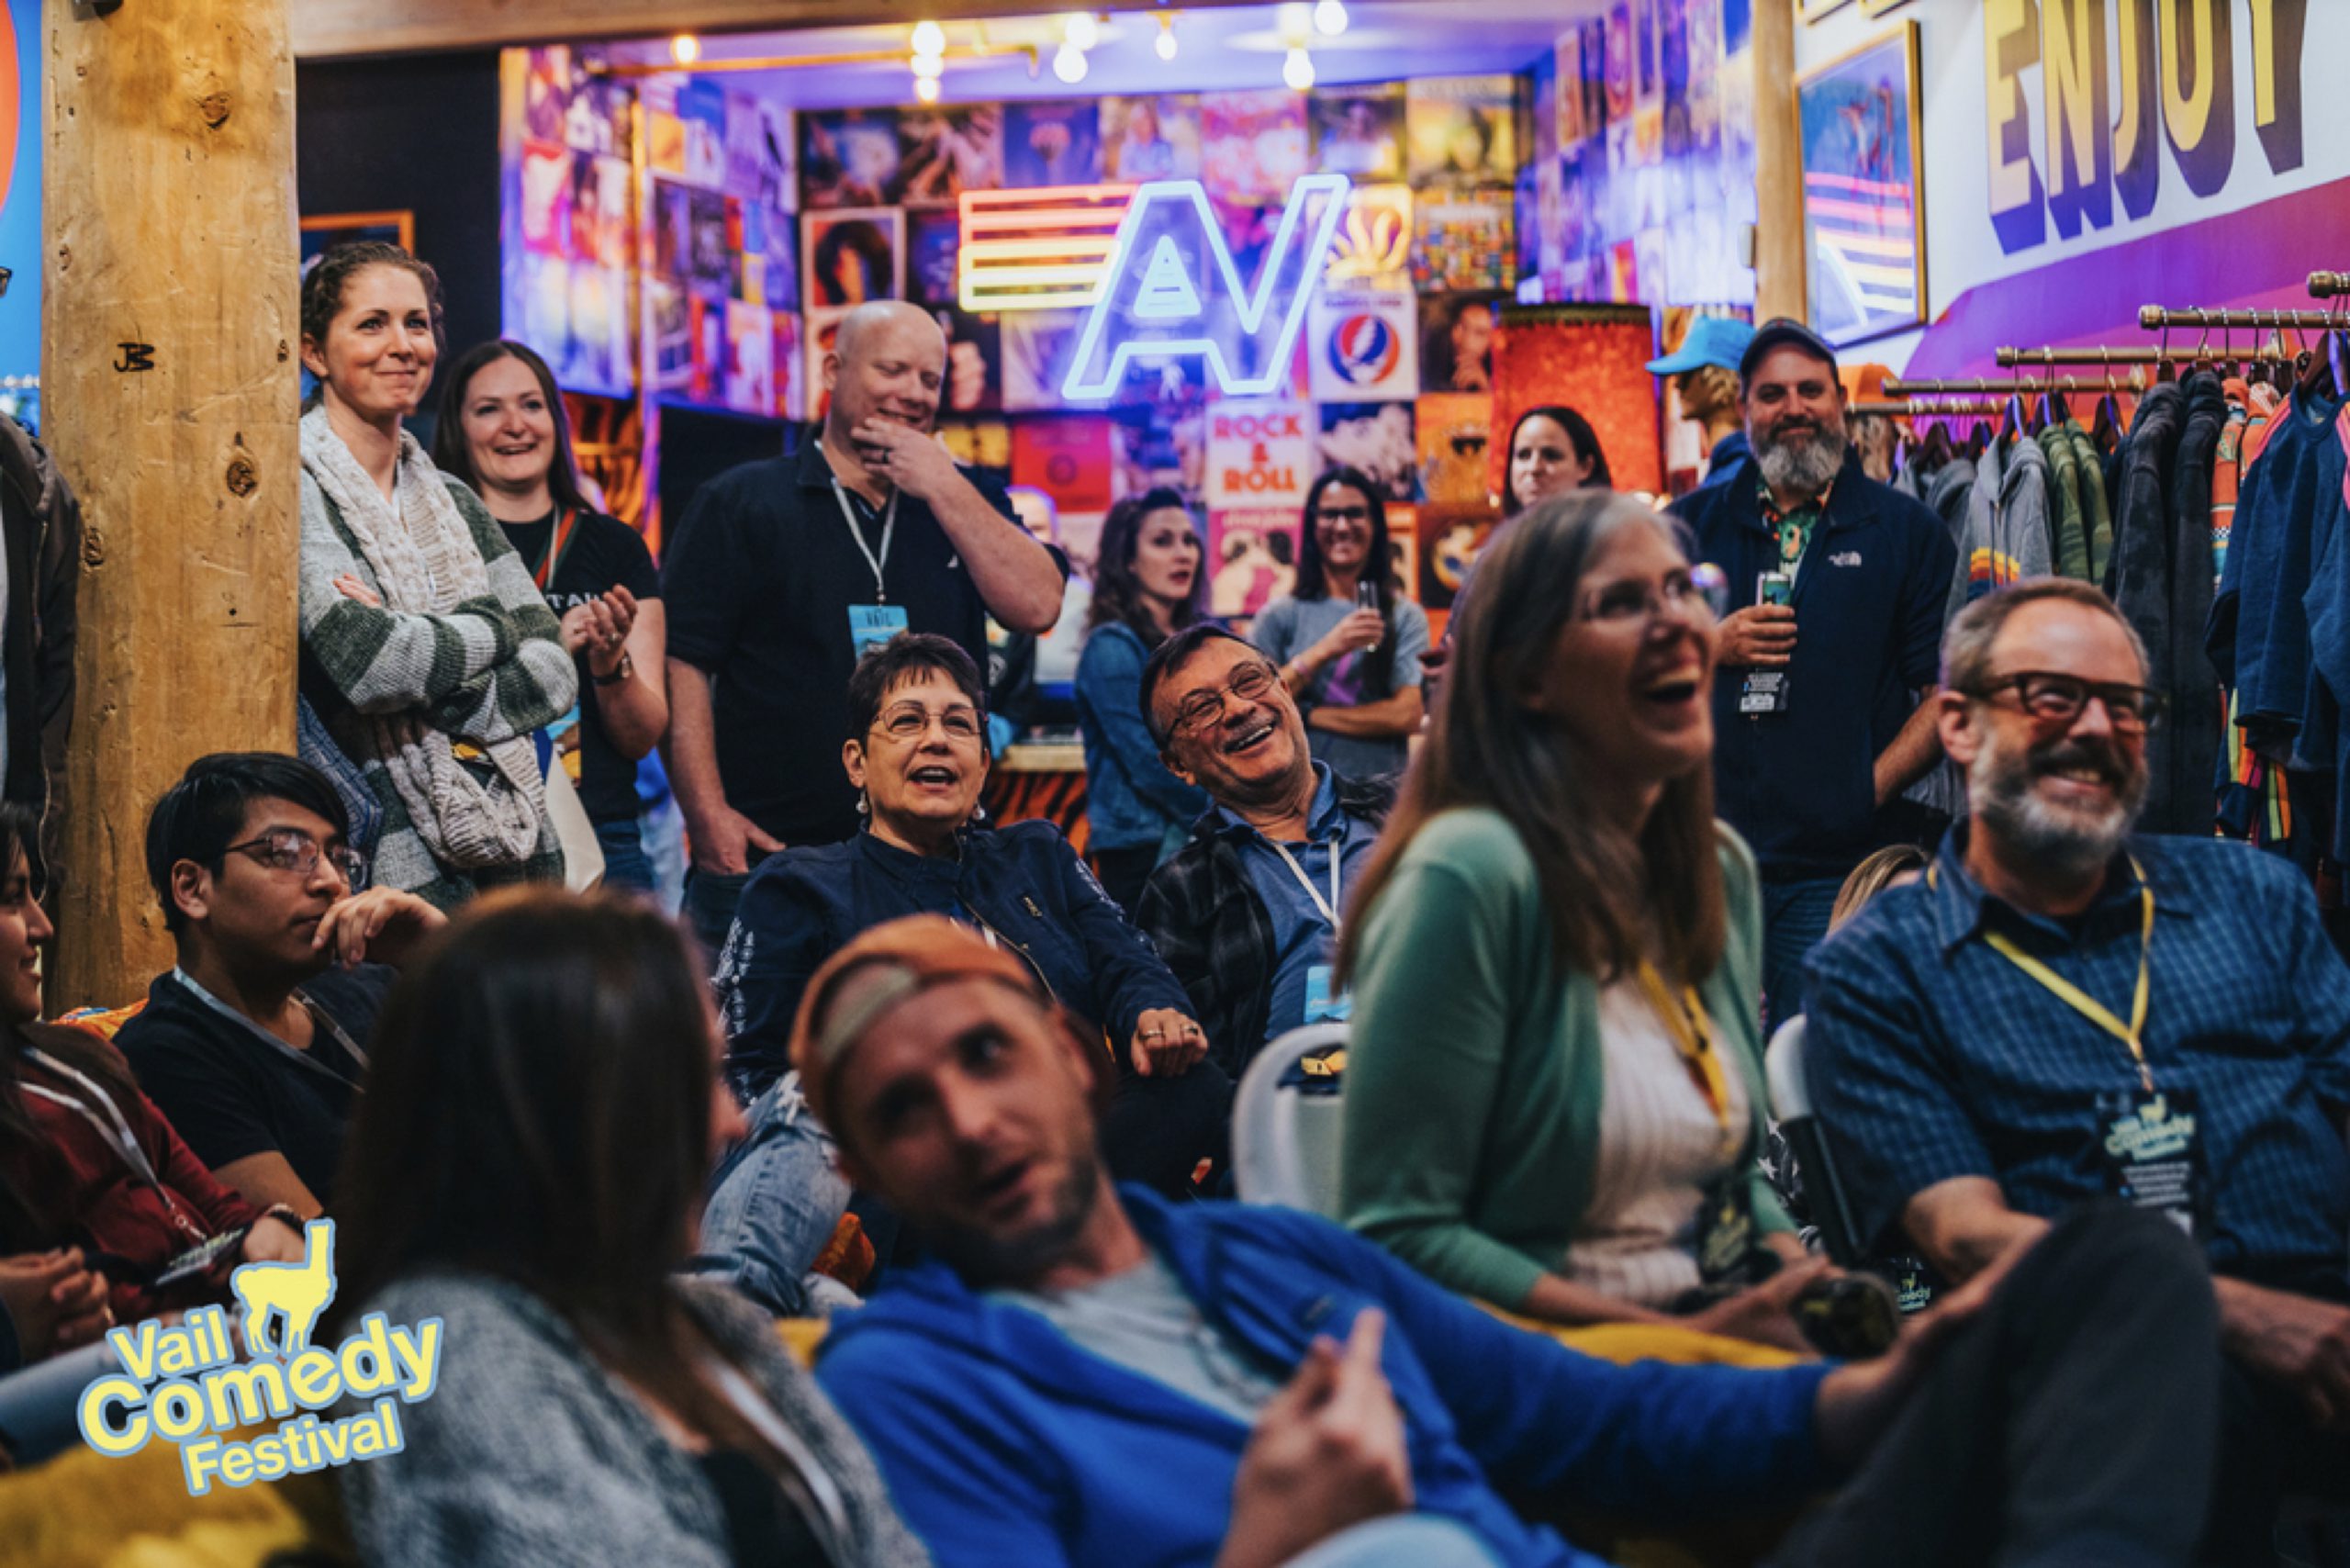 Comedy audience before a show at the 2022 Vail Comedy Festival (photo by Nick Holmby of Dude, IDK Creative)